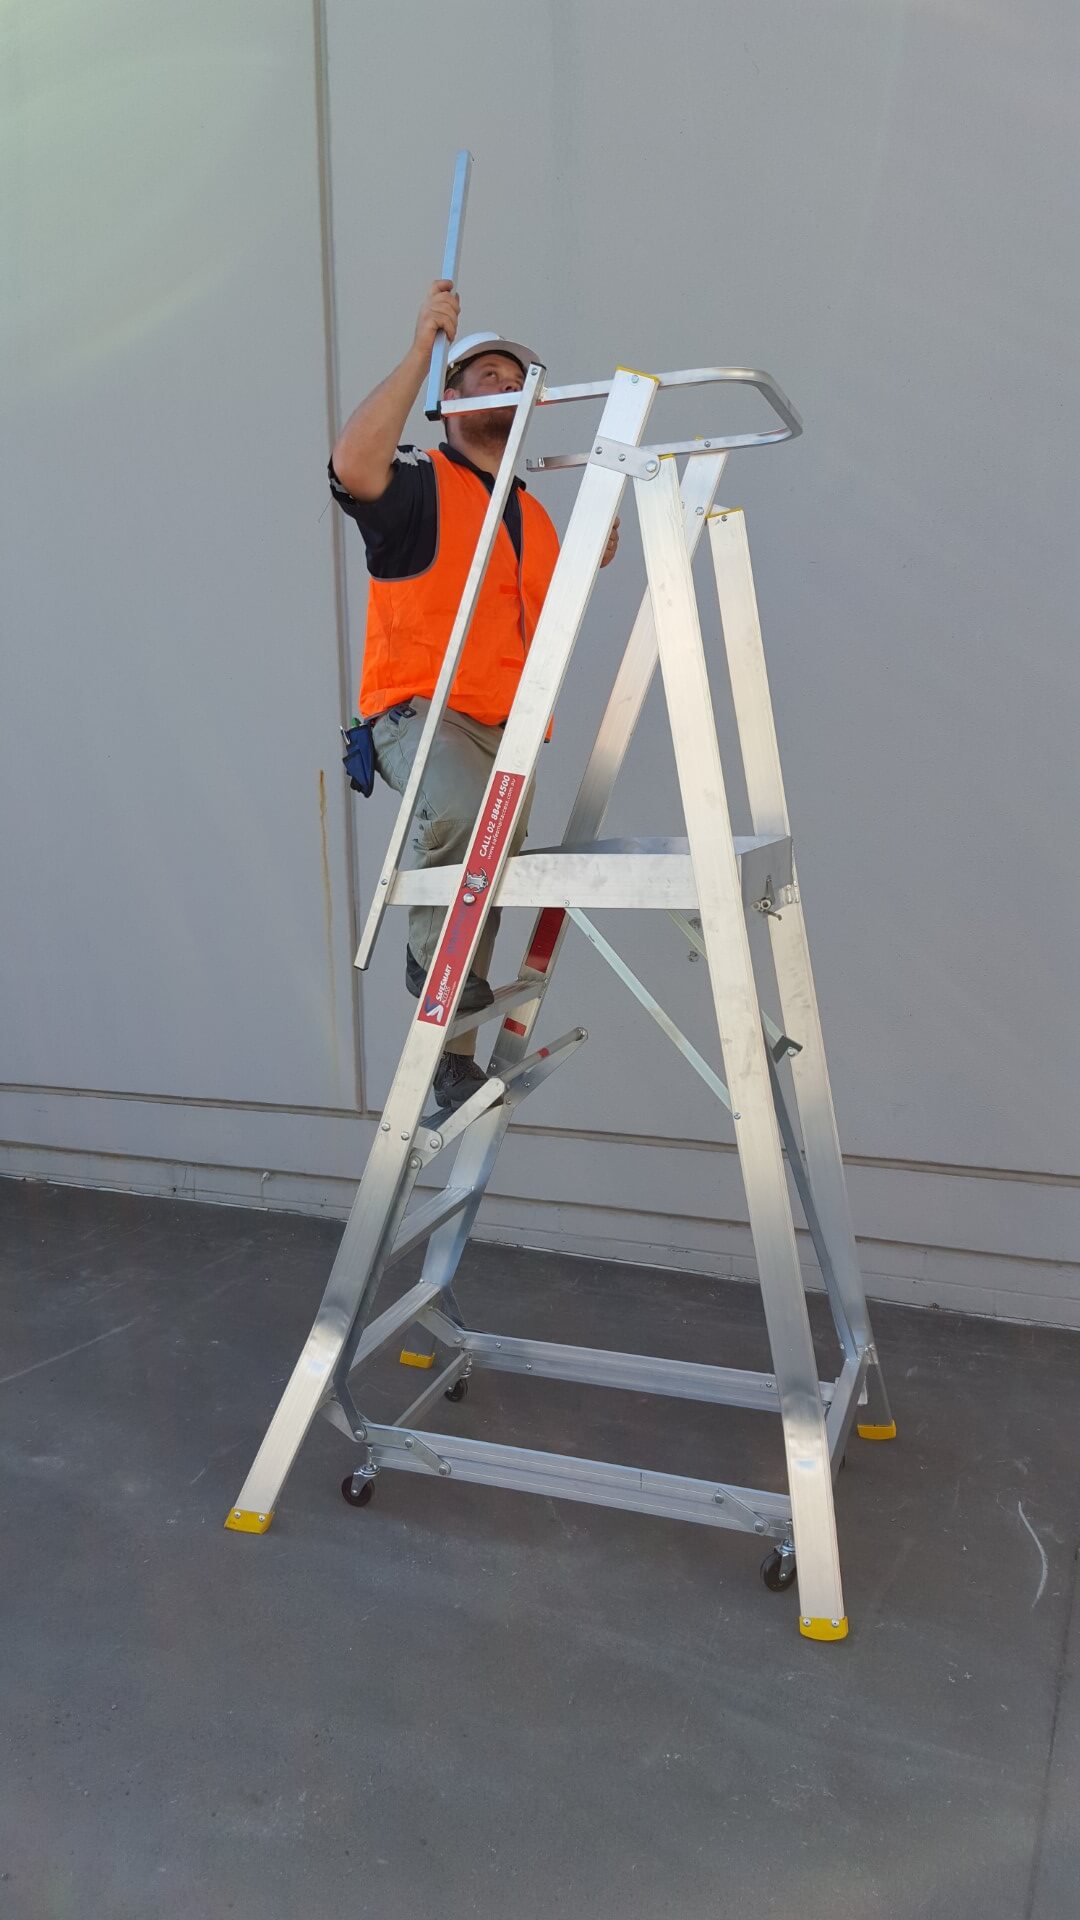 A Frame Ladders and Folding Ladders